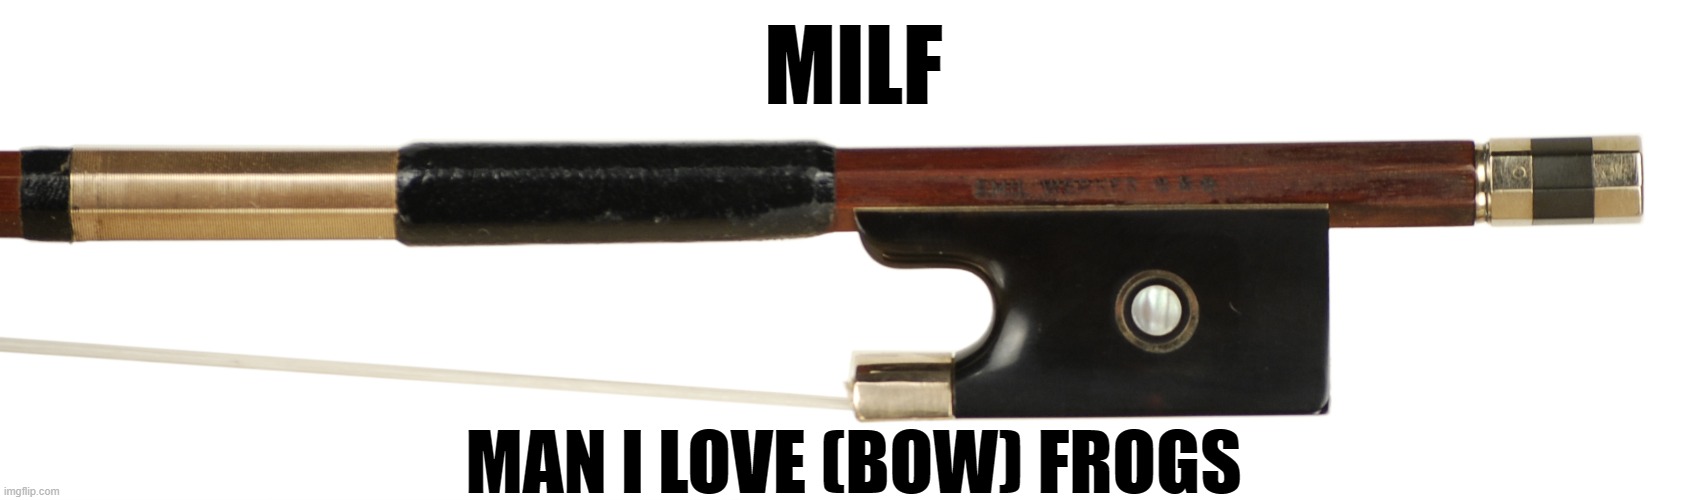 MILF Funny Orchestra Meme |  MILF; MAN I LOVE (BOW) FROGS | image tagged in funny,milf,memes,funny memes,orchestra,music | made w/ Imgflip meme maker